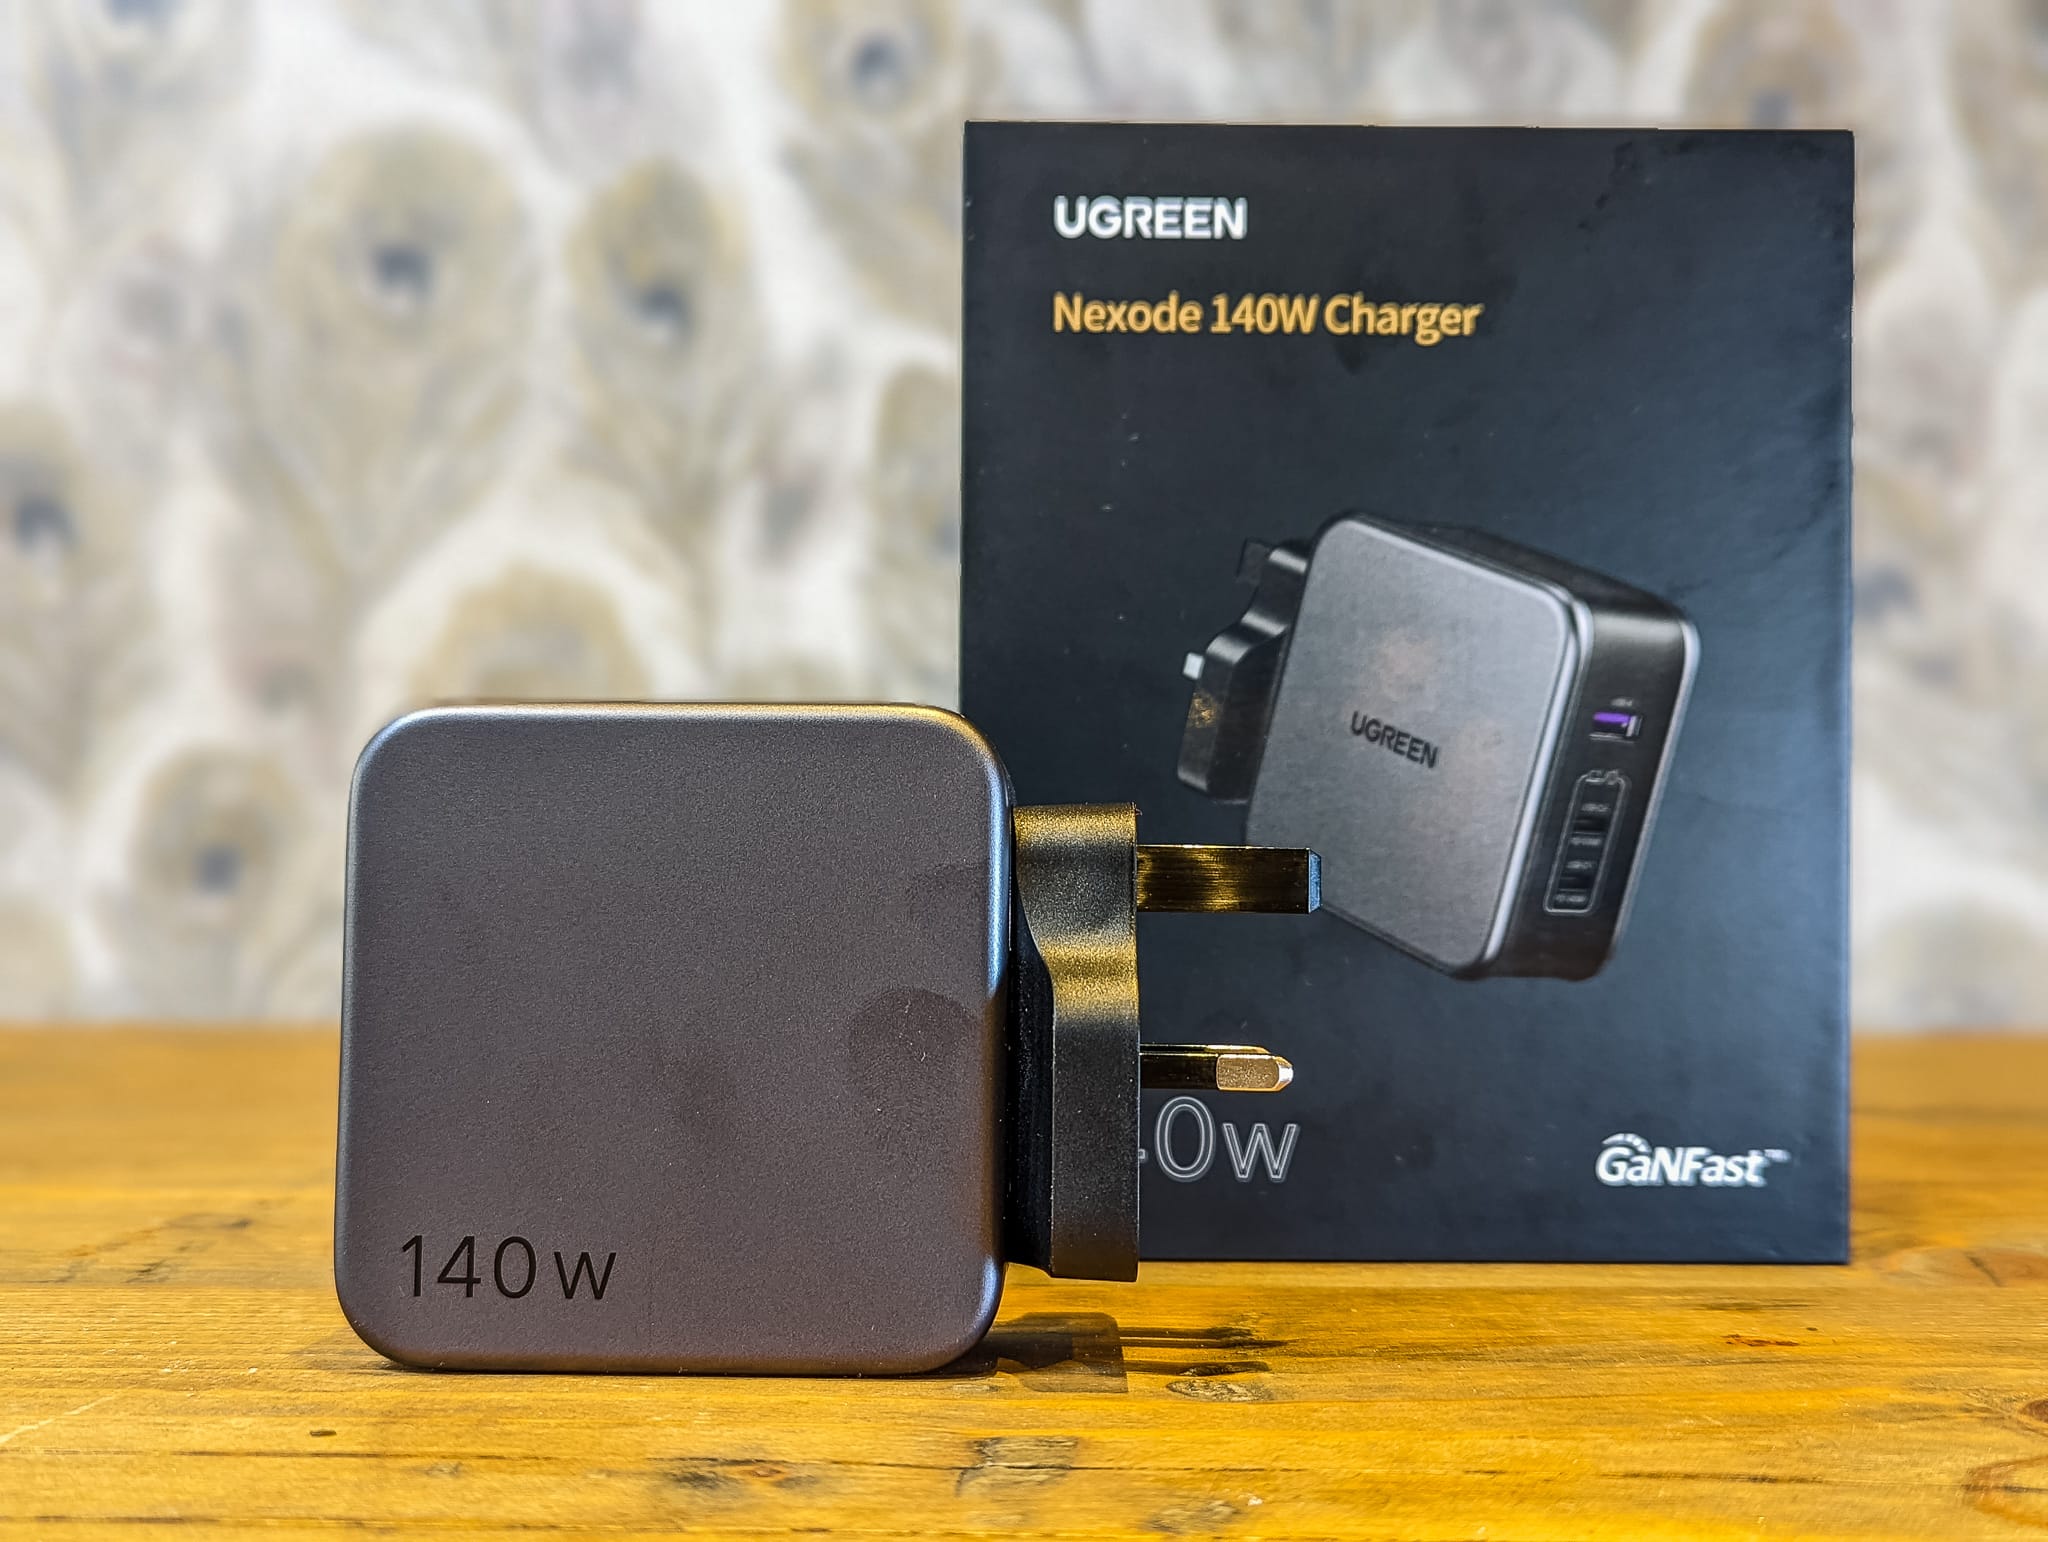 Ugreen Nexode 140W GaNFast Charger Review – Power Delivery
3.1 for 140W on a single port